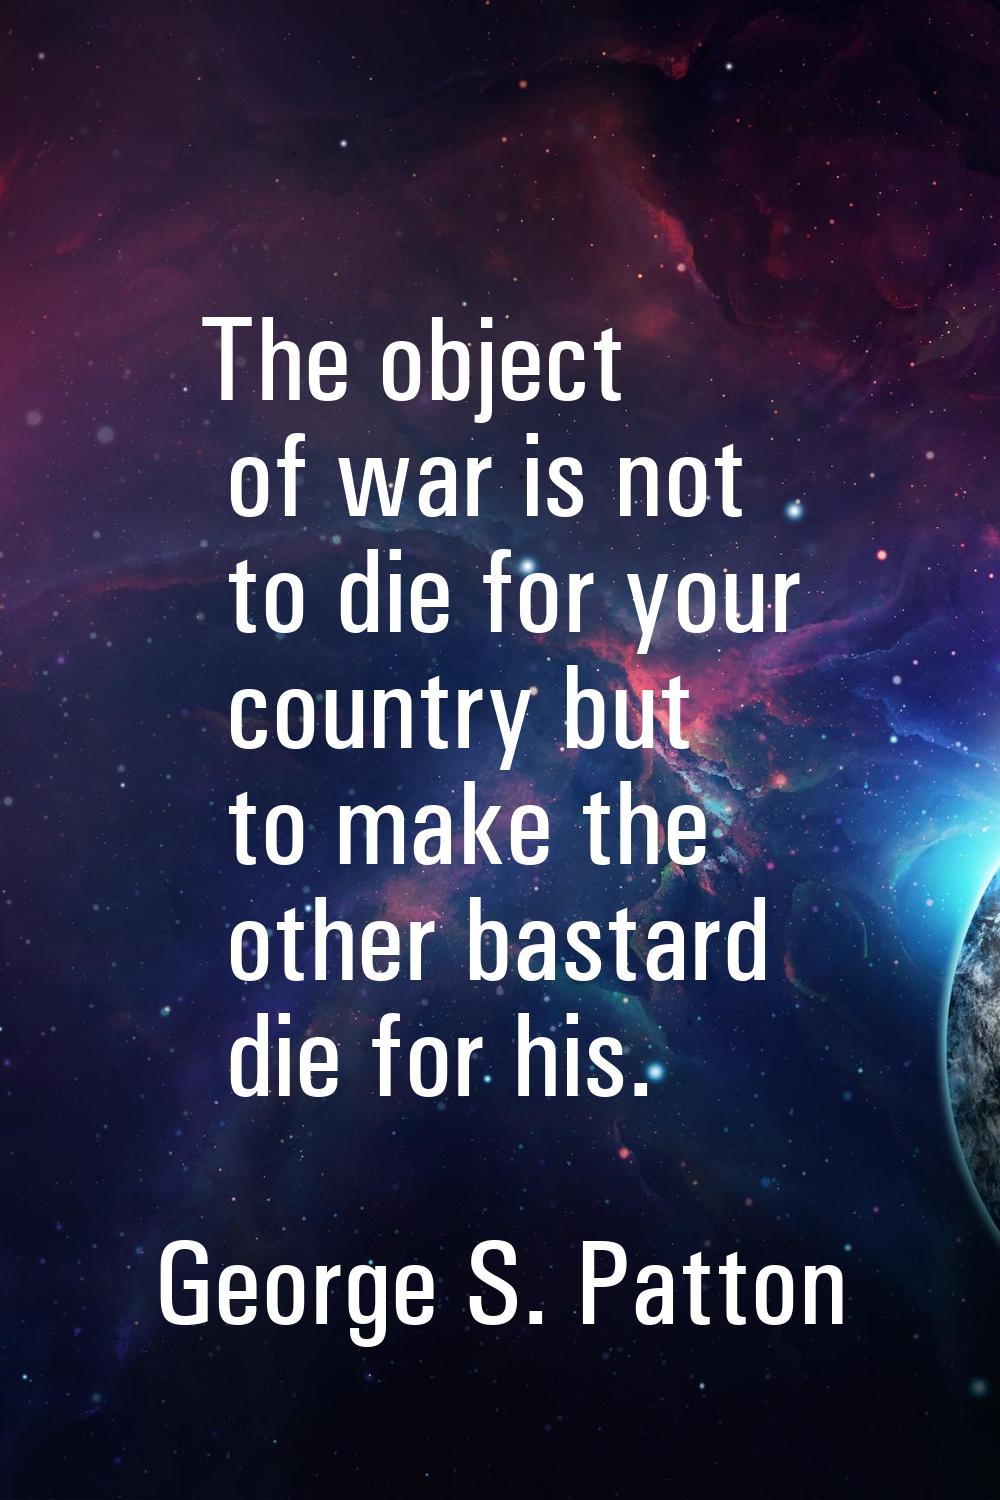 The object of war is not to die for your country but to make the other bastard die for his.